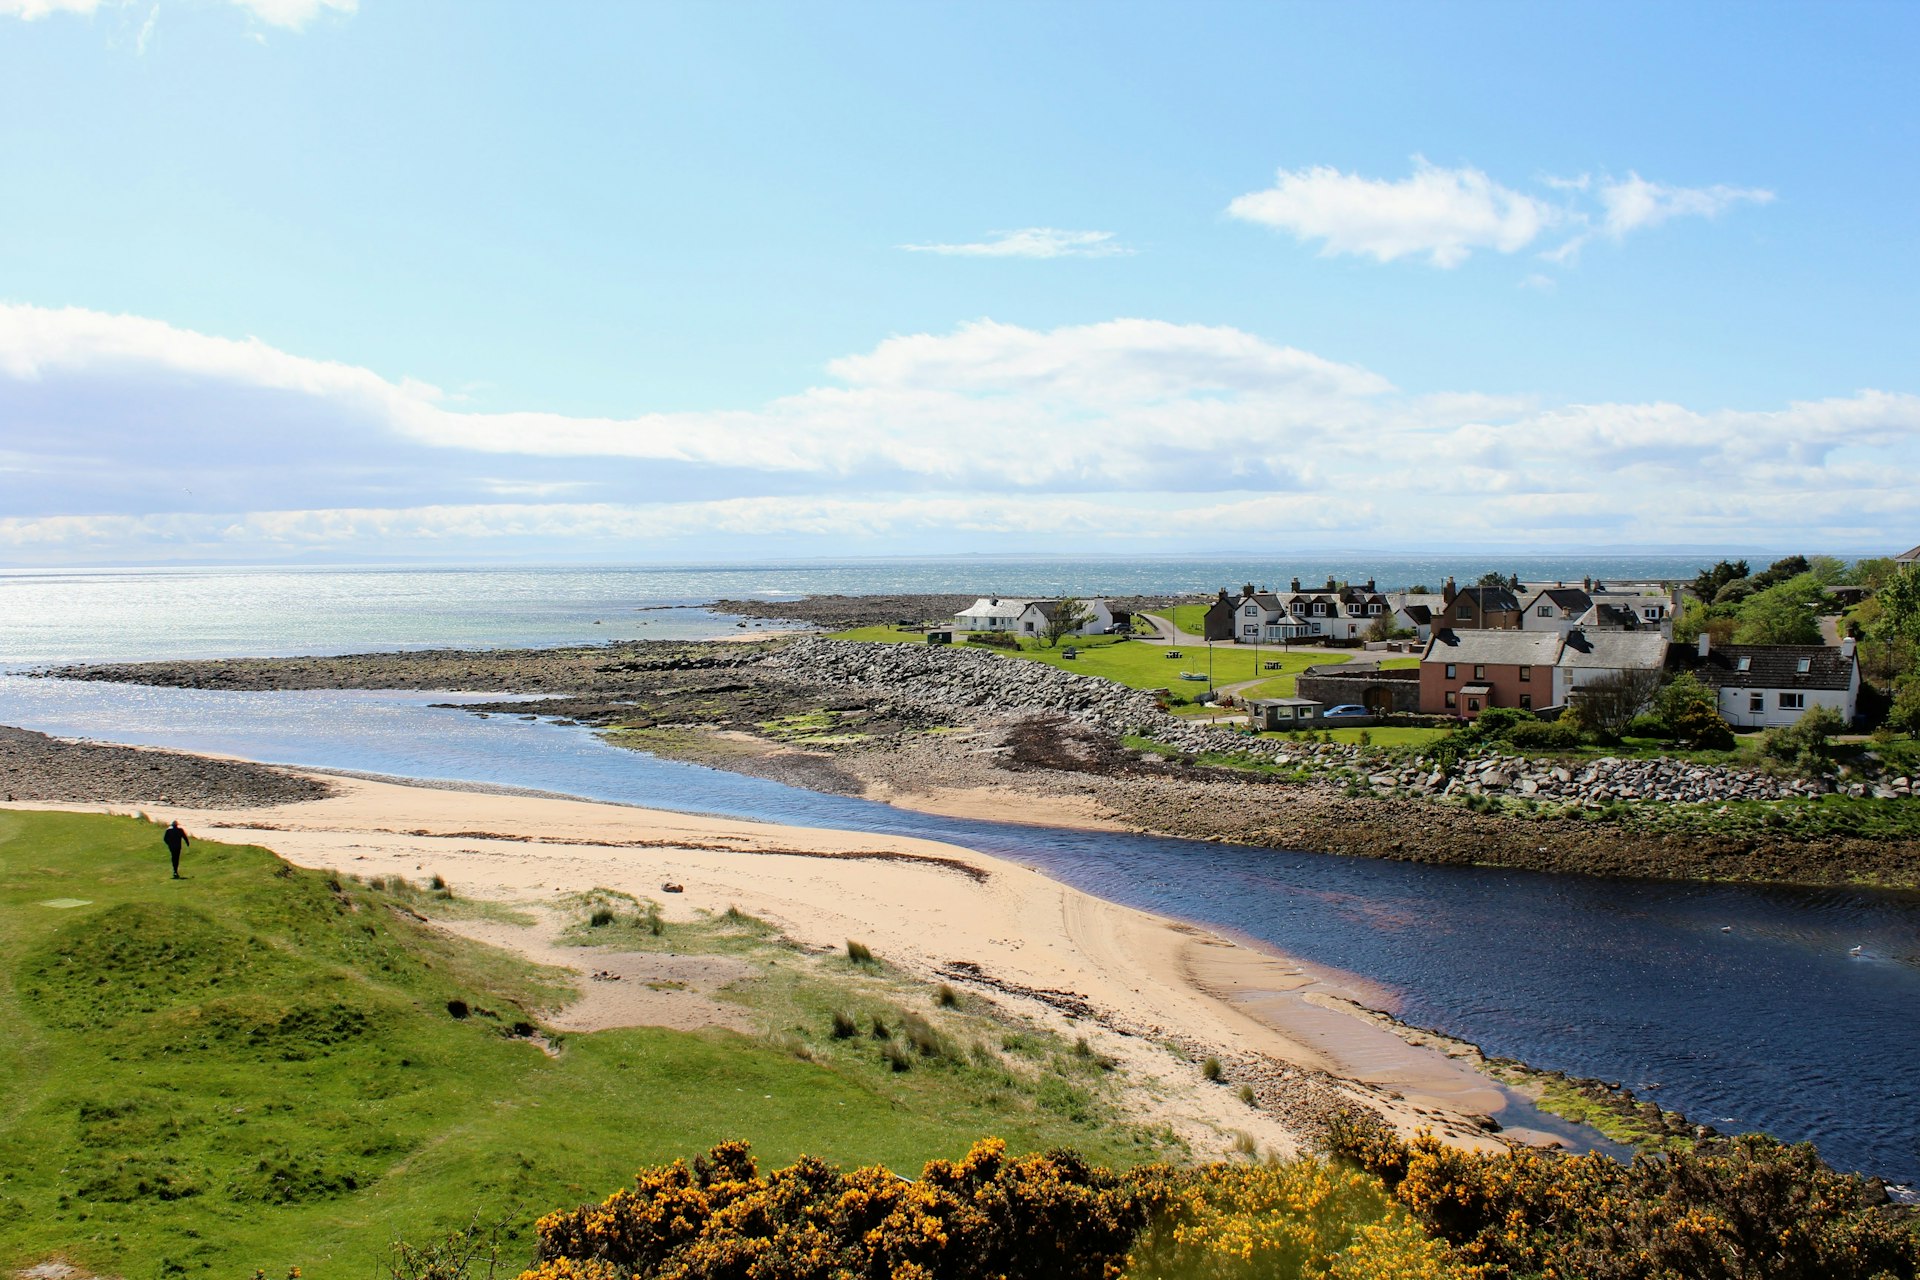 A beautiful view of the town of Brora, Highlands, Scotland